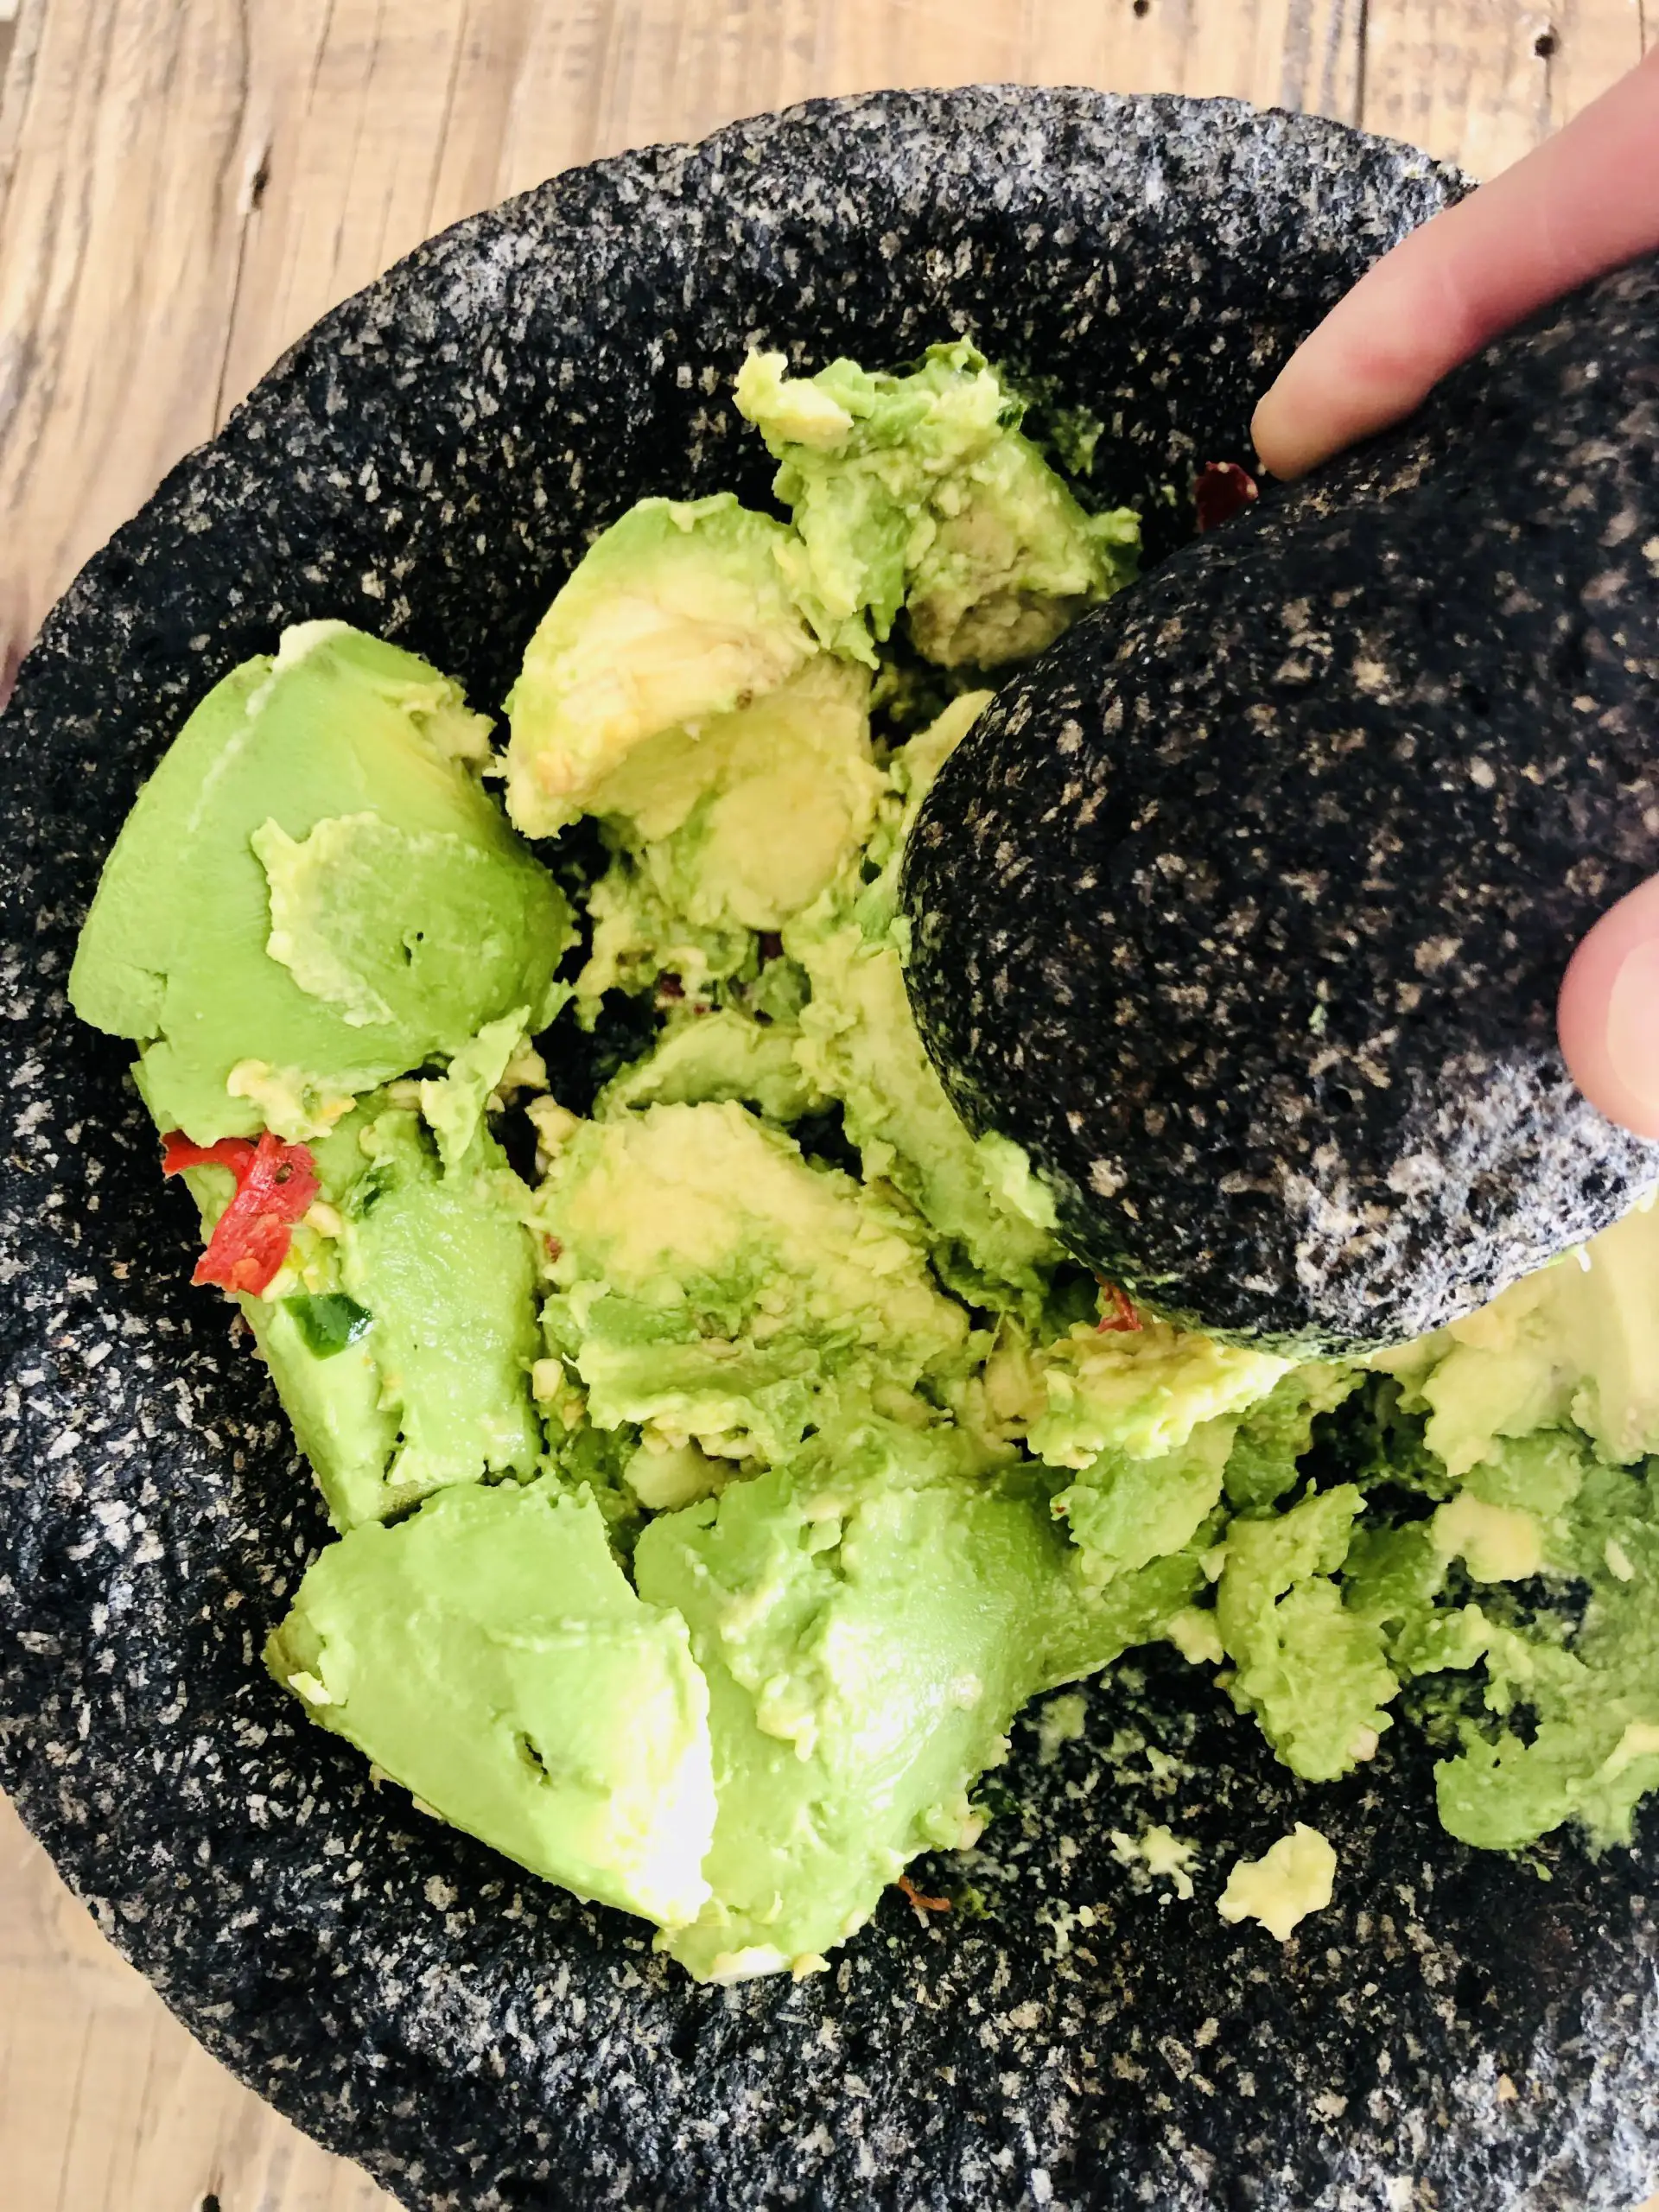 Mashed avocado in a molcajete with a pestle